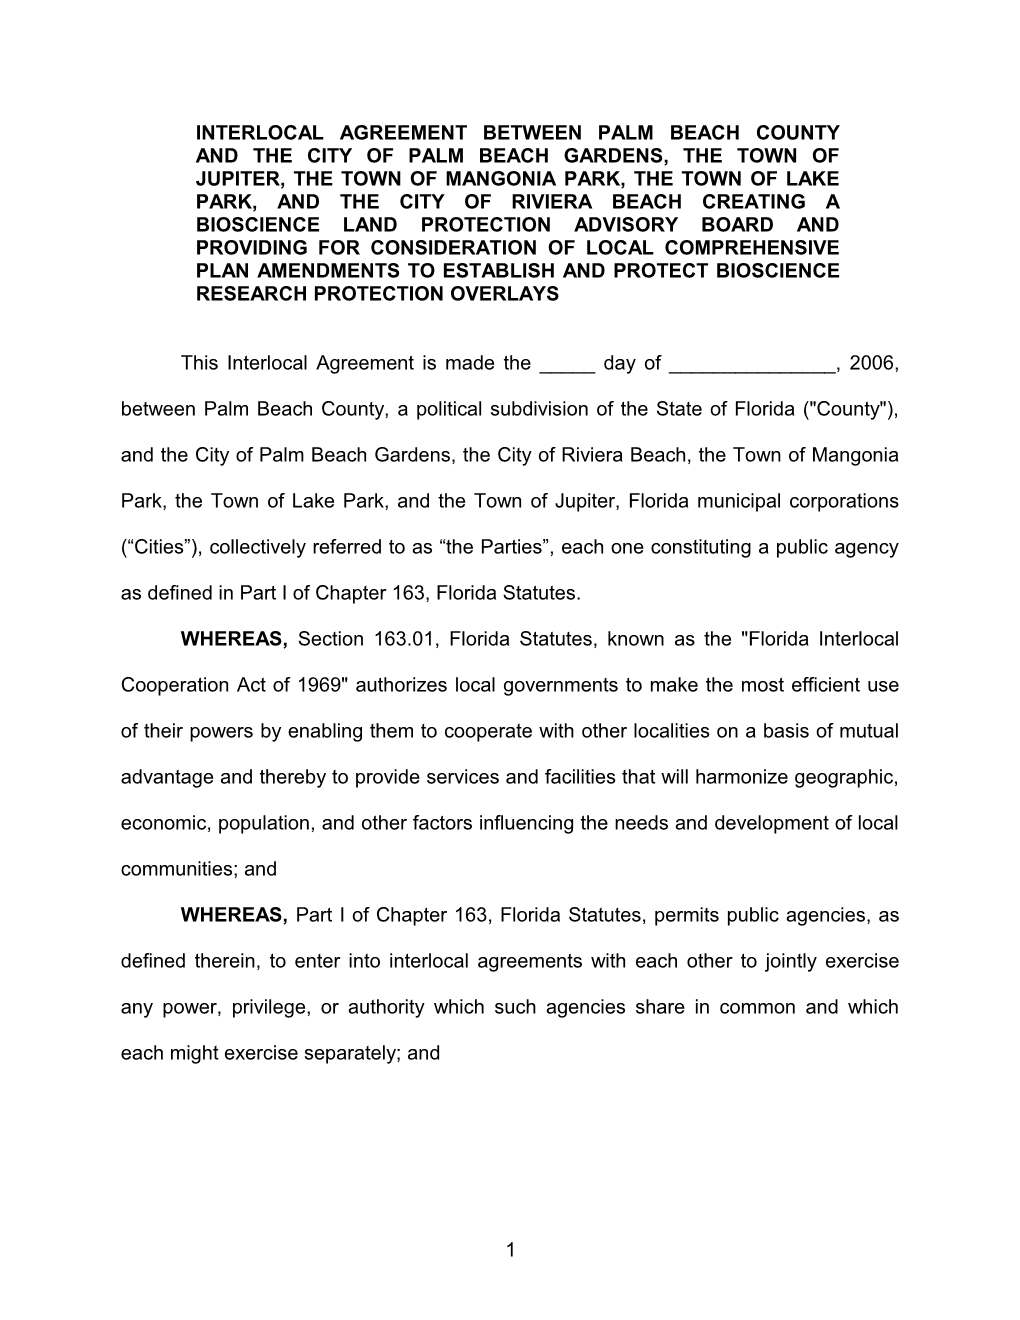 Interlocal Agreement Between Palm Beach County and the City of Palm Beach Gardens, The